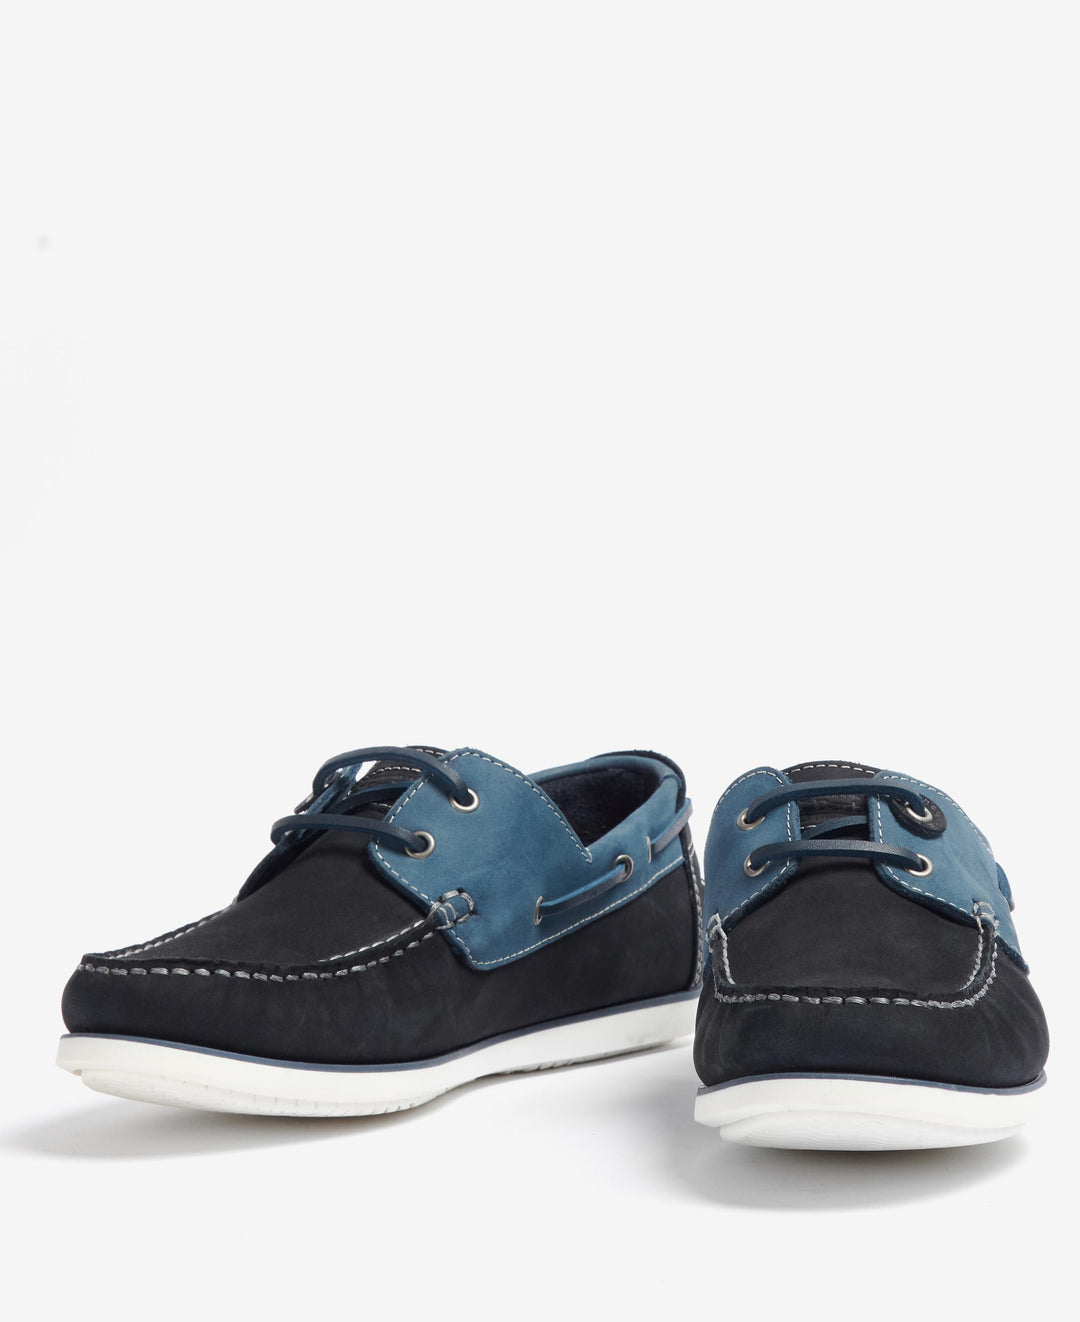 BARBOUR WAKE SHOE - WASHED BLUE